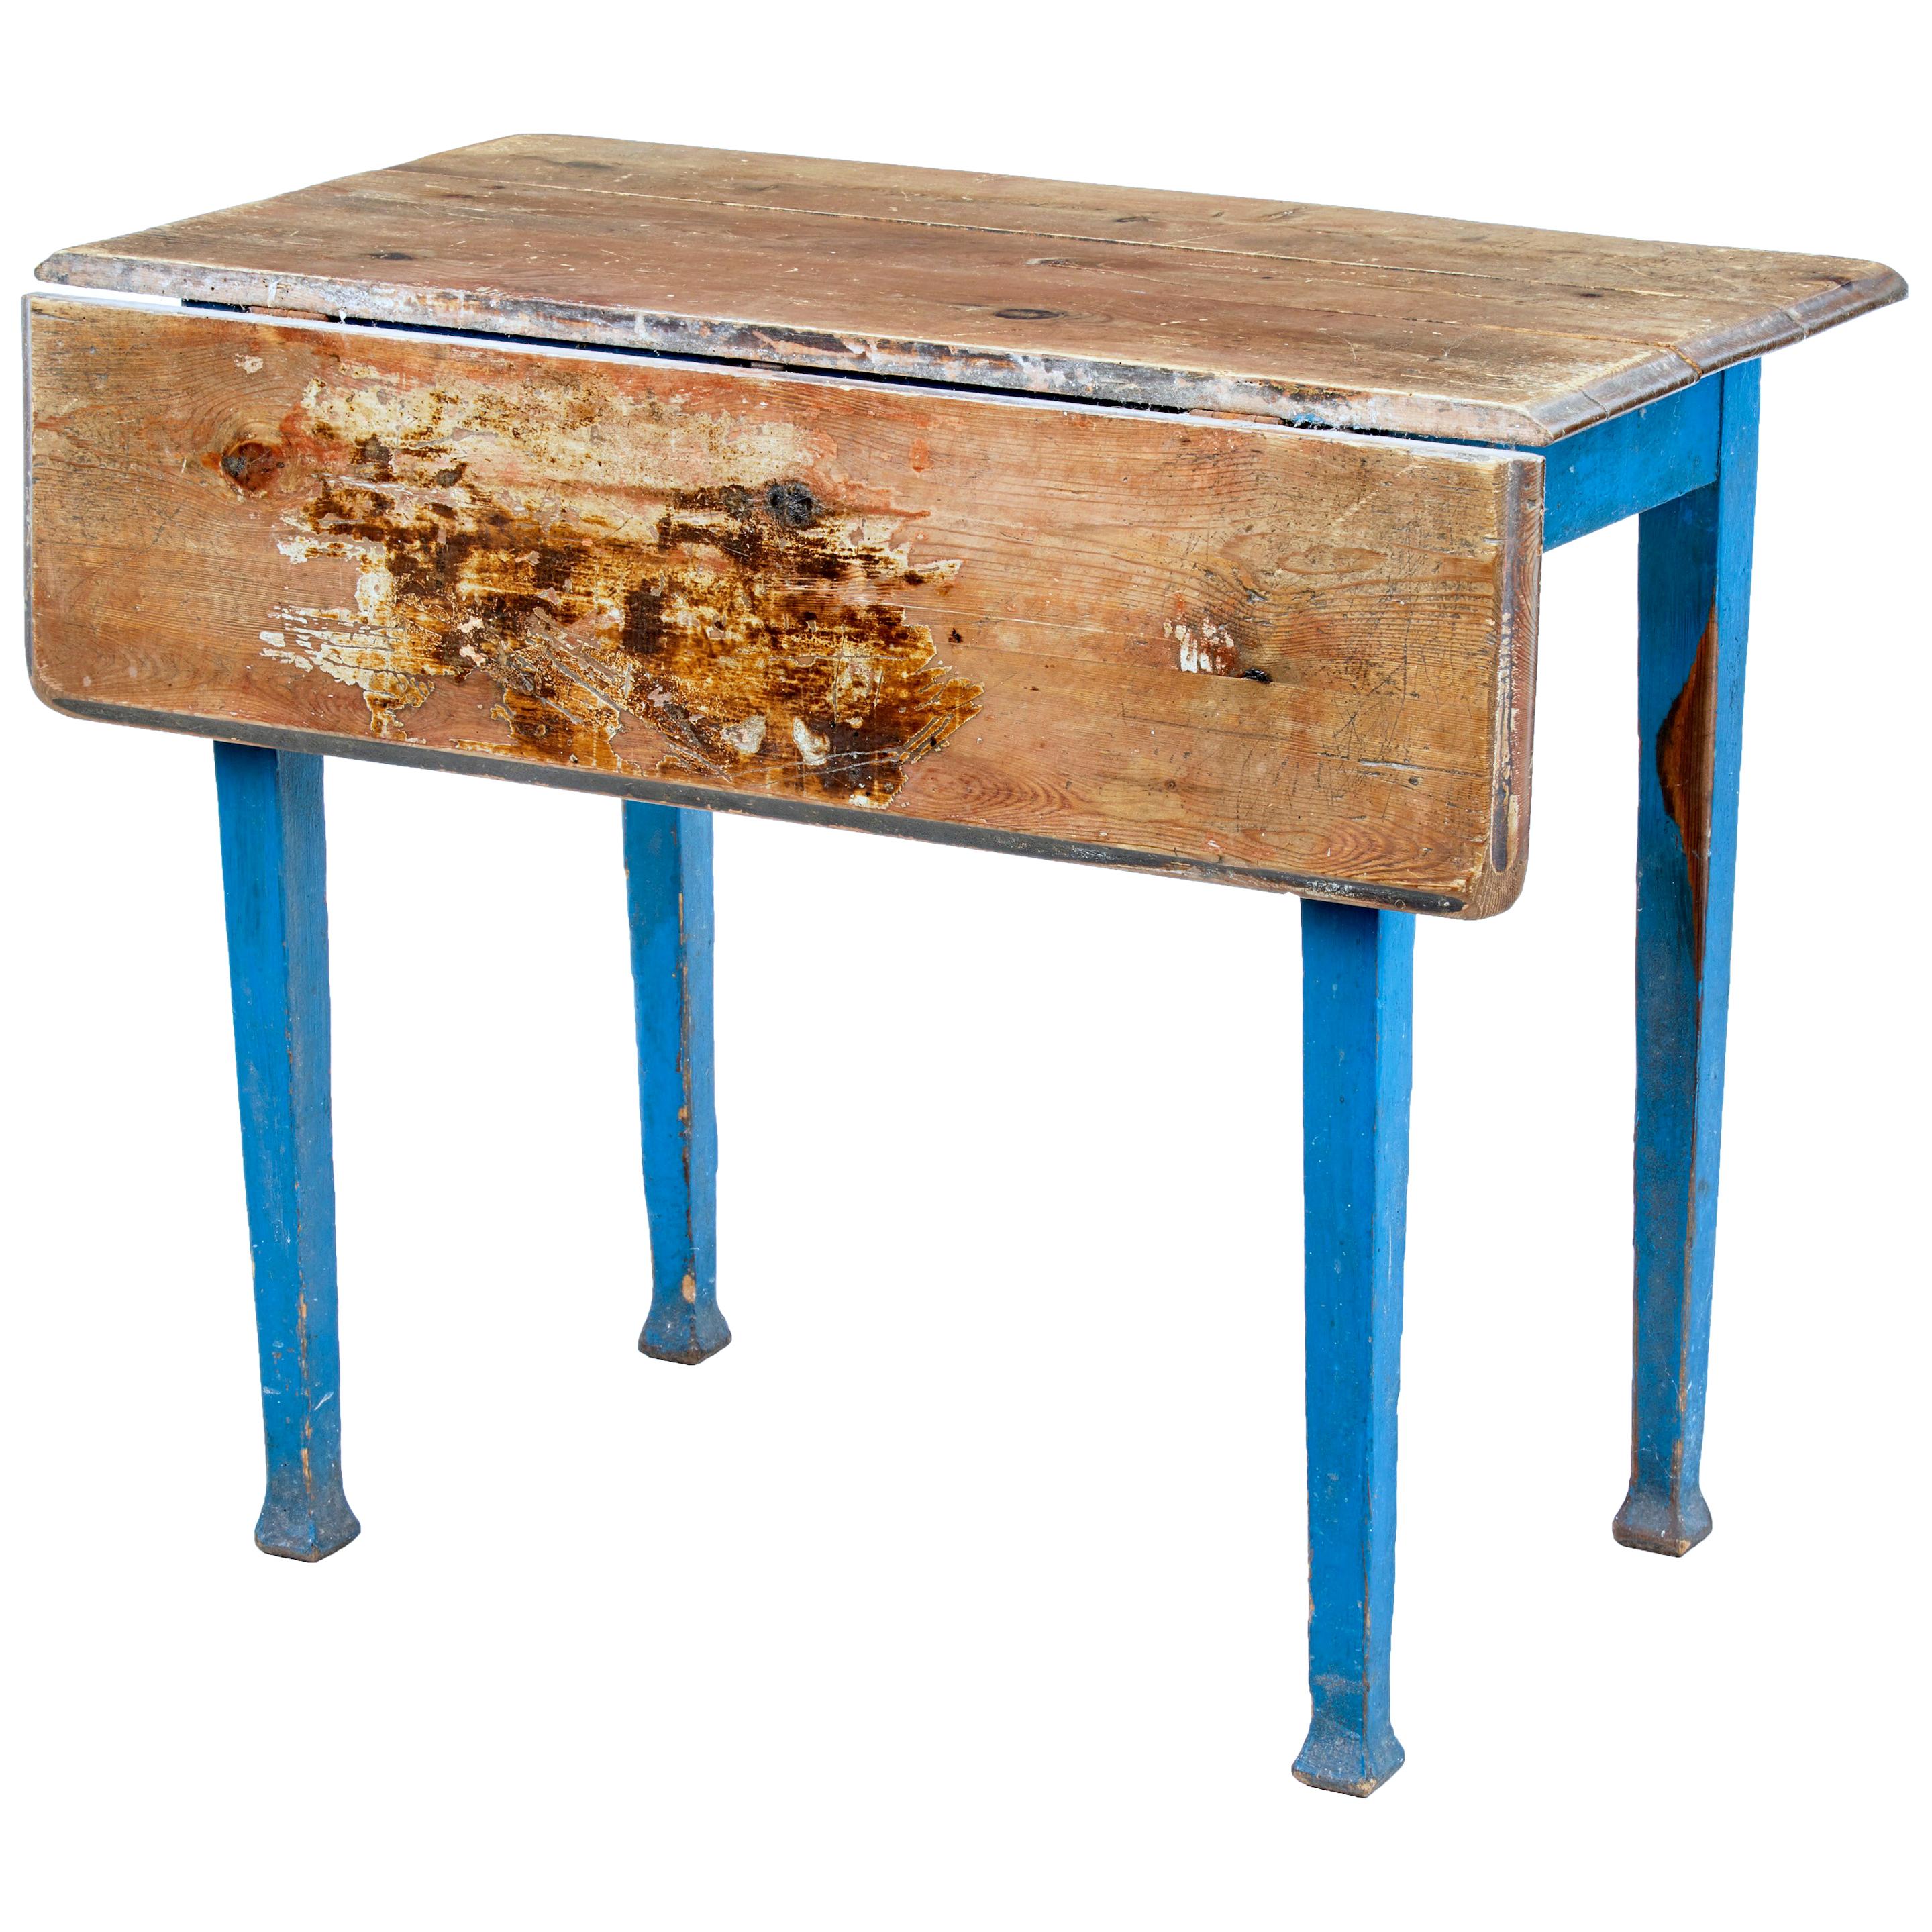 19th Century Rustic Swedish Painted Pine Drop-Leaf Table